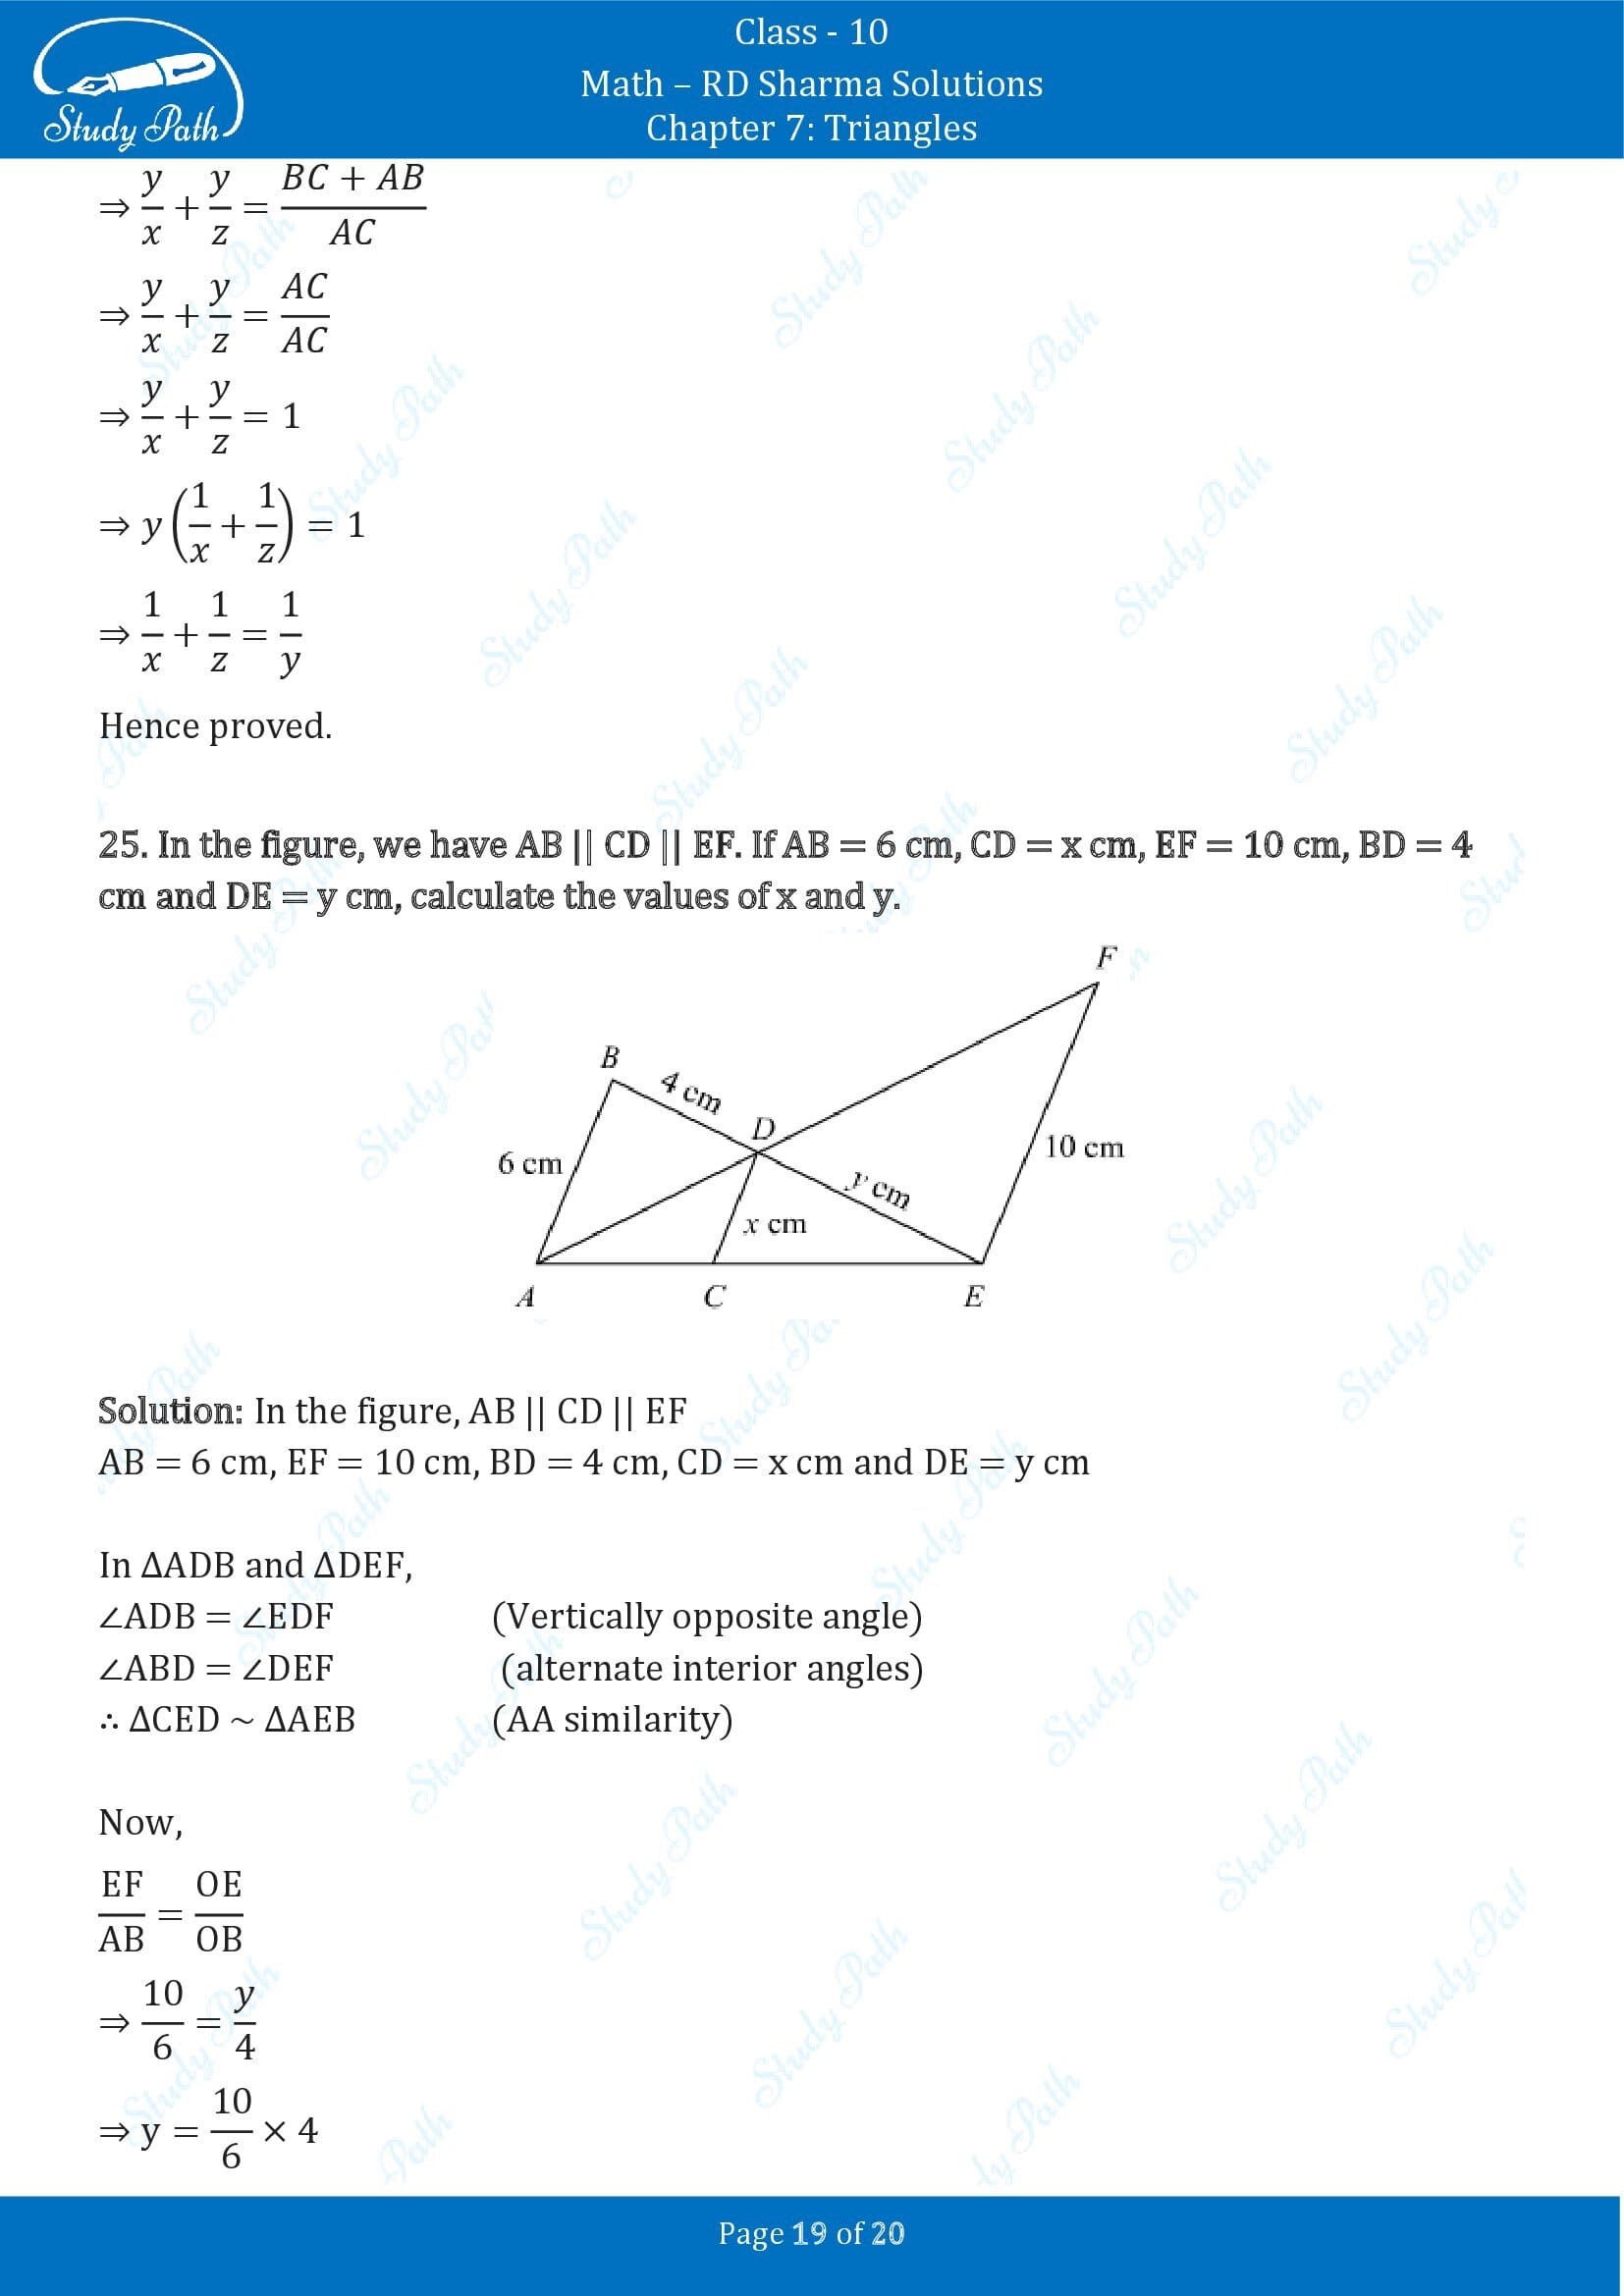 RD Sharma Solutions Class 10 Chapter 7 Triangles Exercise 7.5 00019